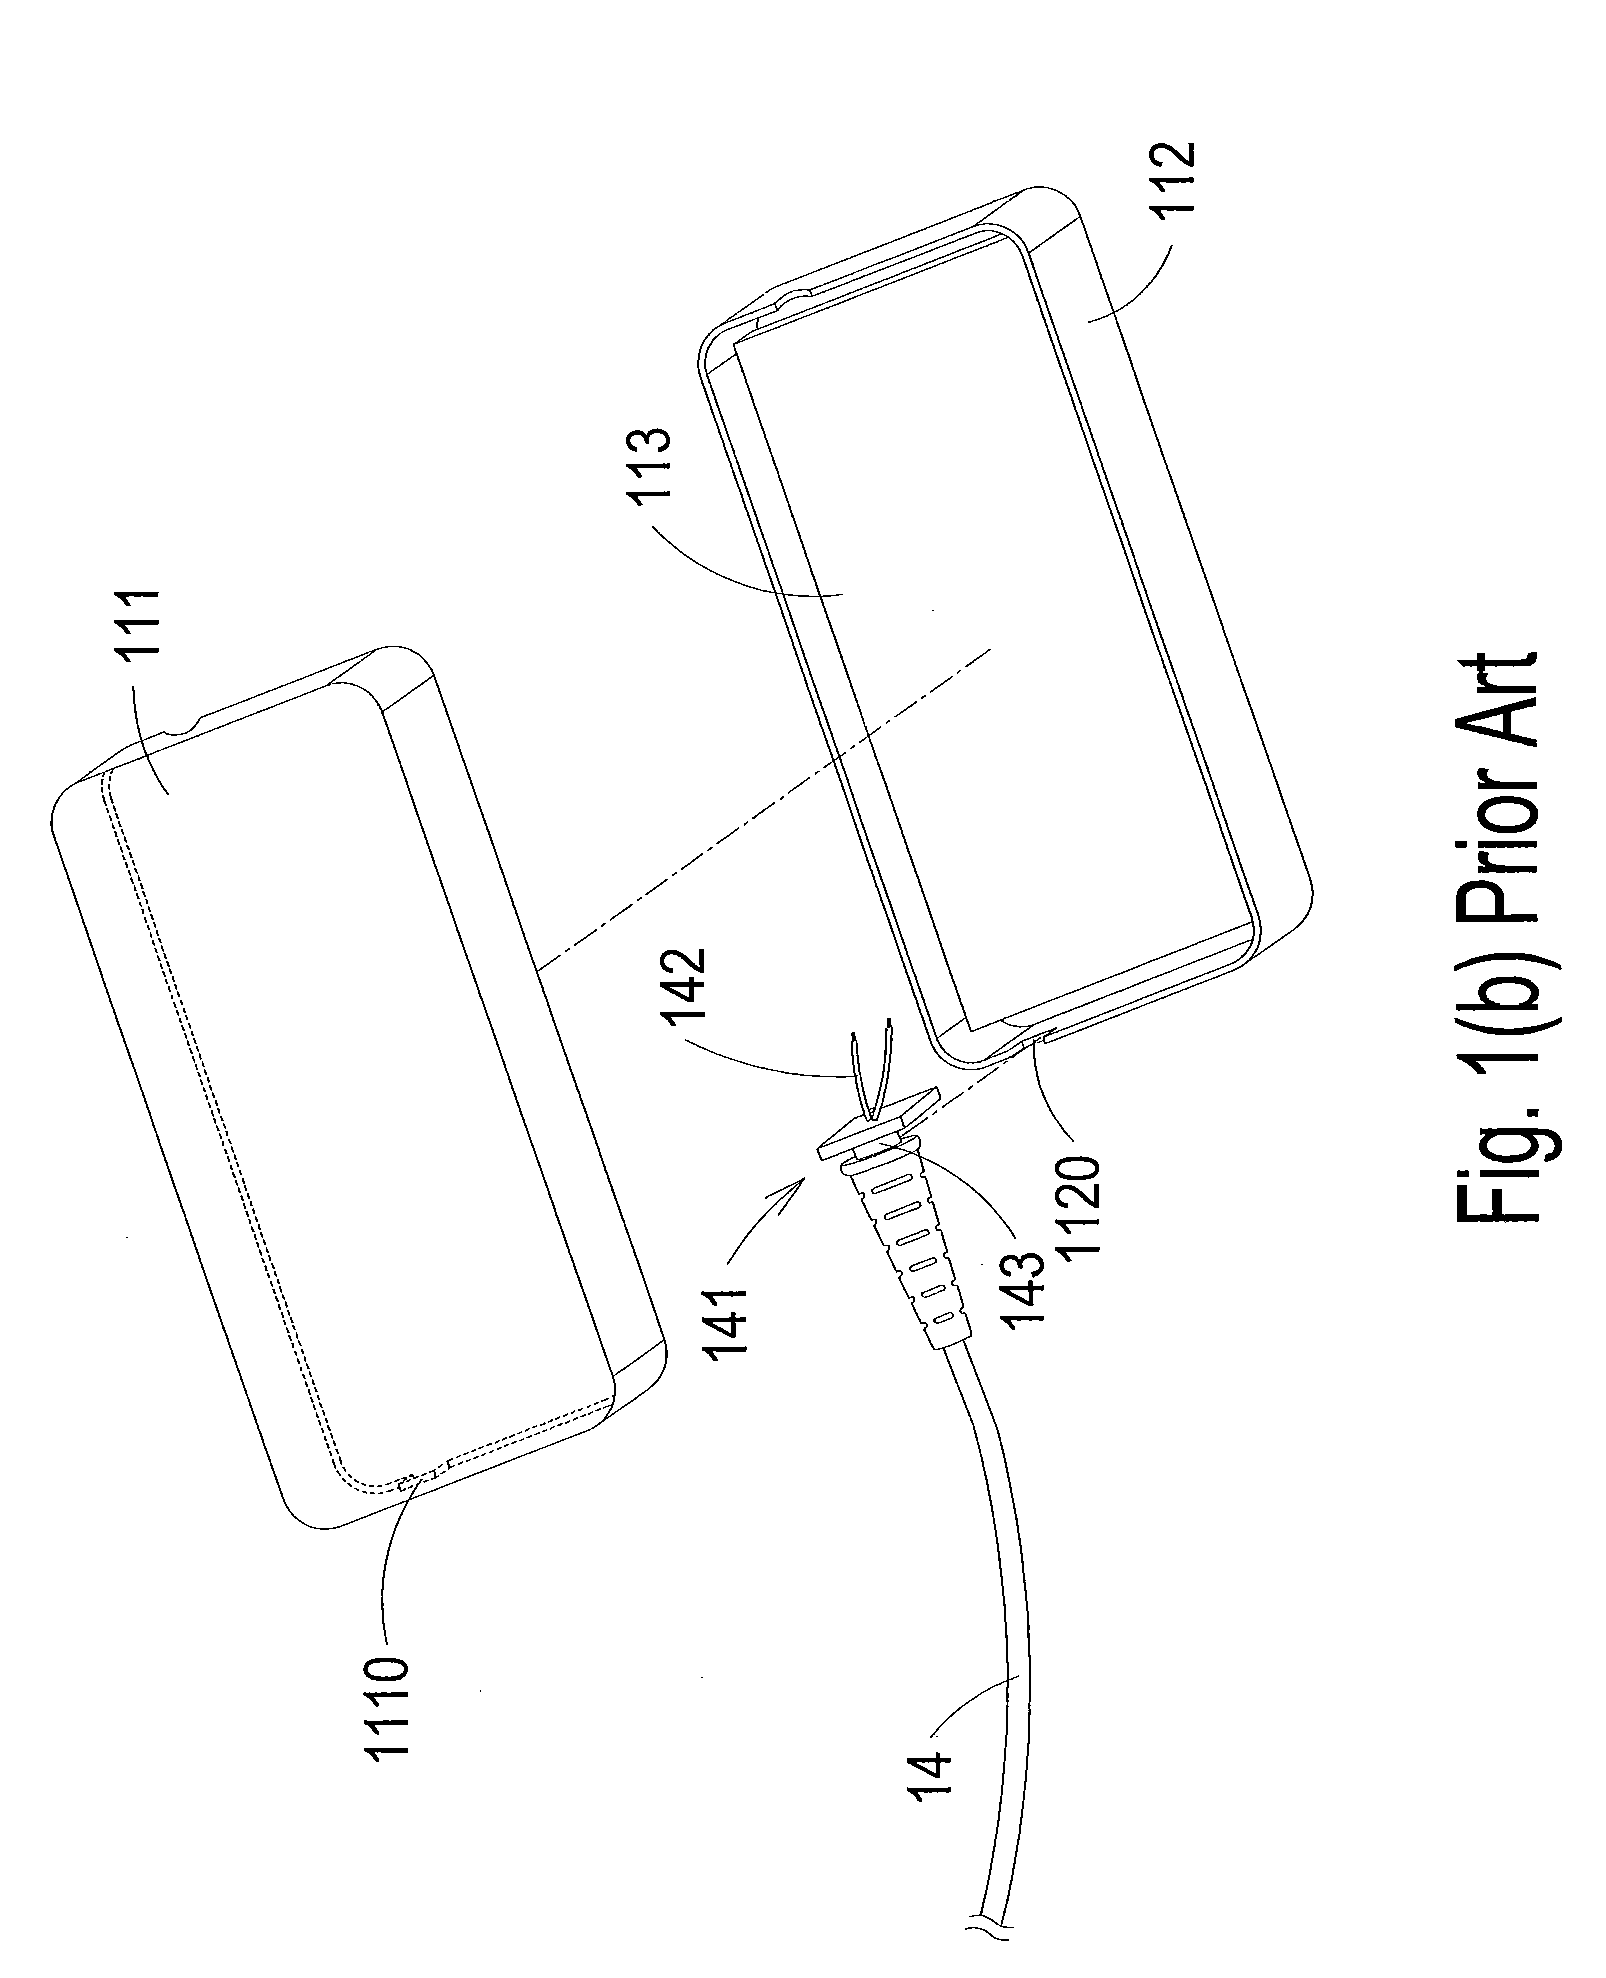 Power adapter having detachable power cable coupler head